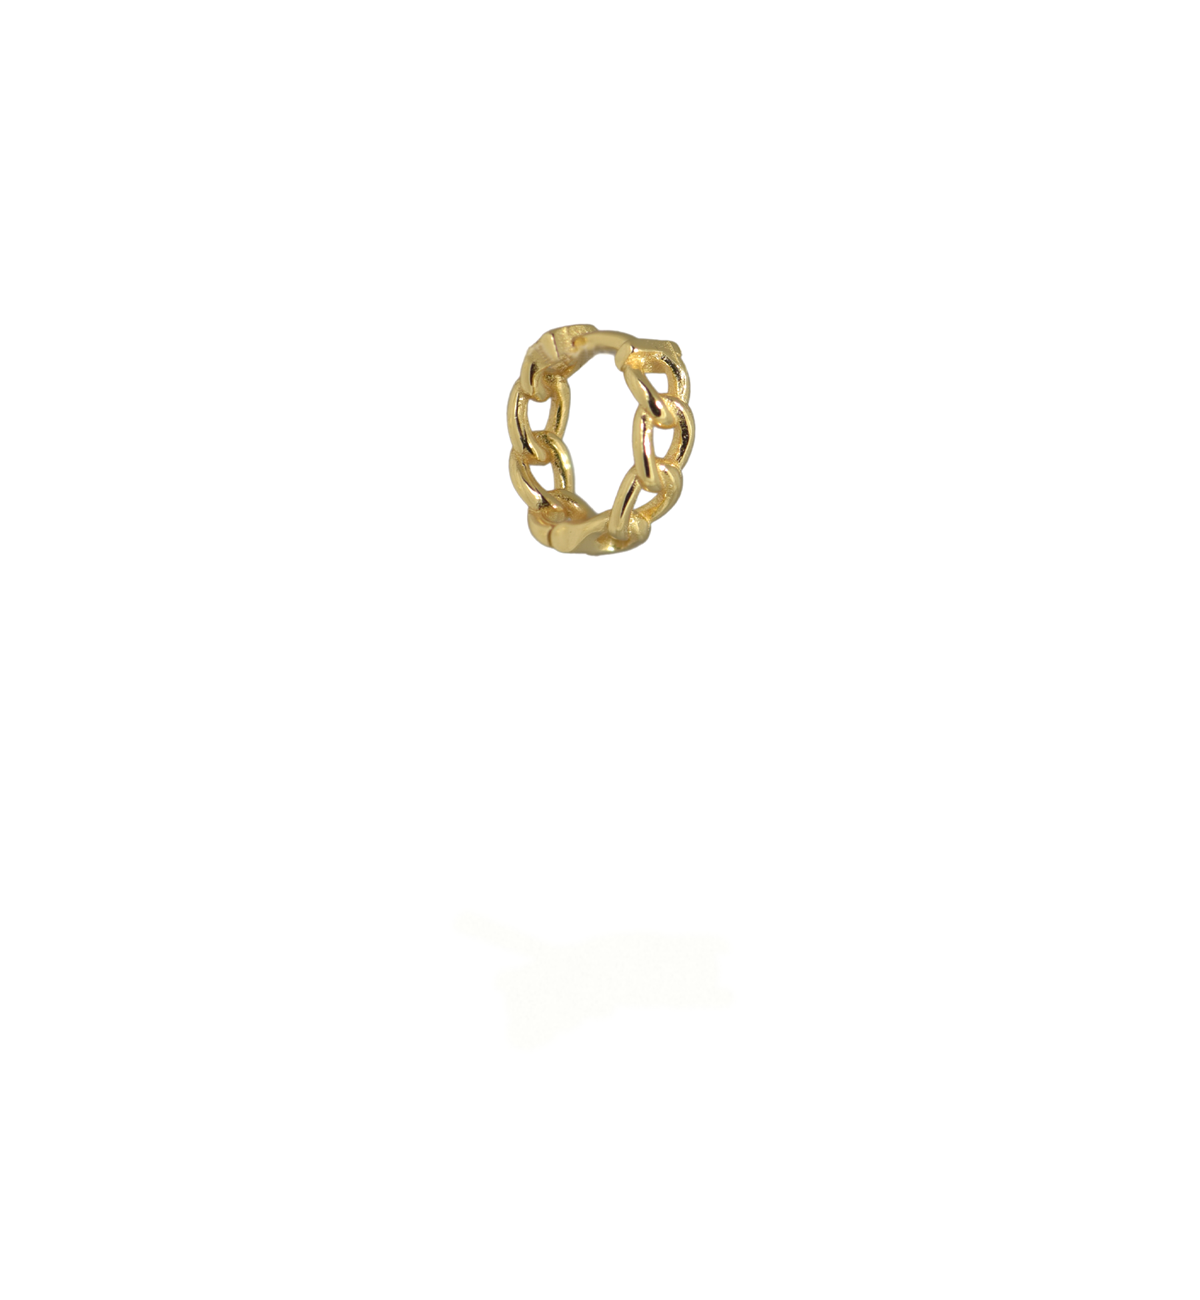 Unchained 18Kt Gold-Plated Mini Huggie Hoop